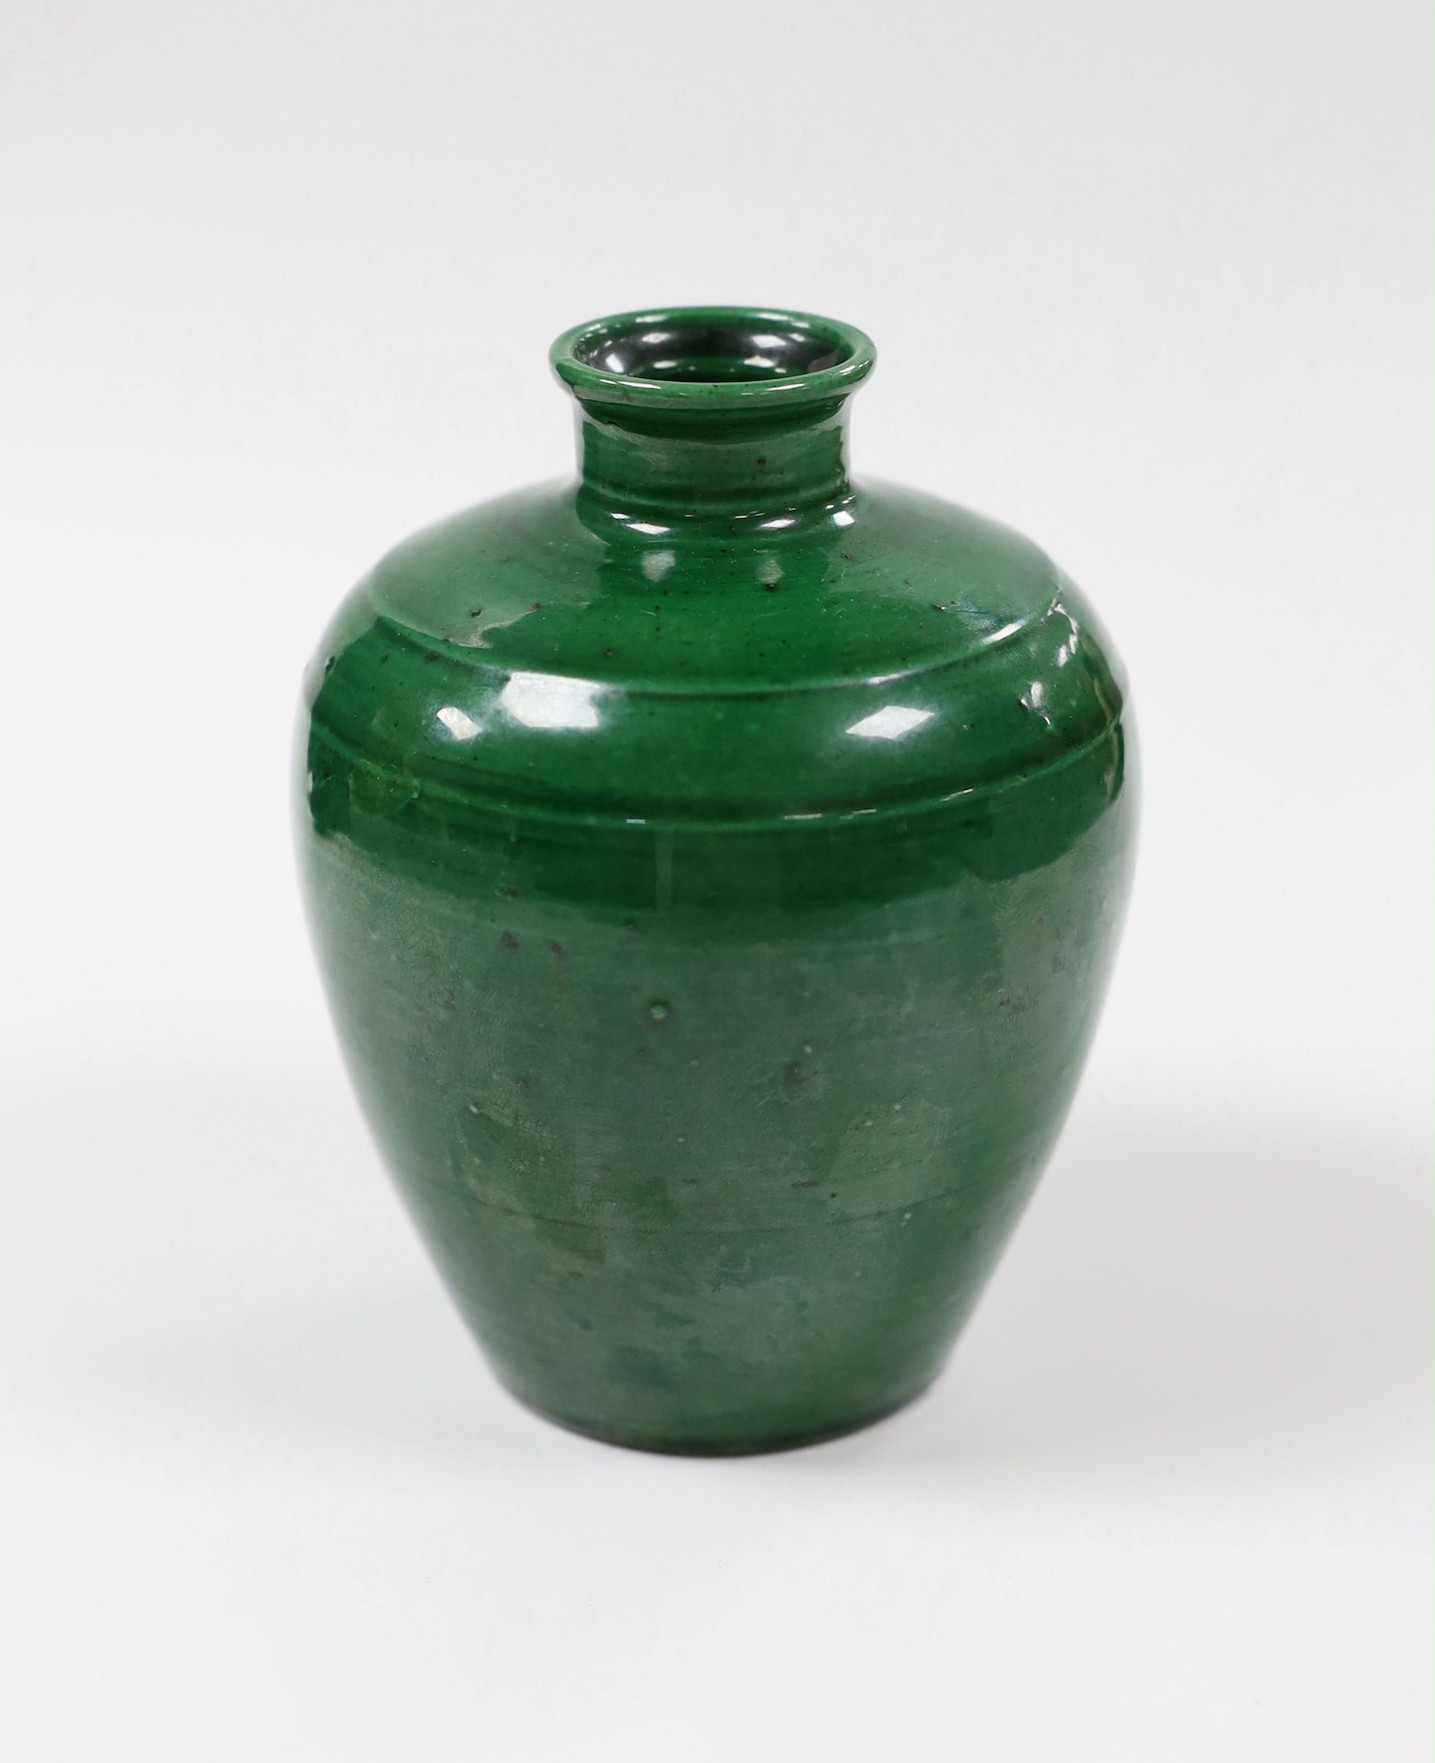 A Chinese green glazed vase, 11.5cm tall